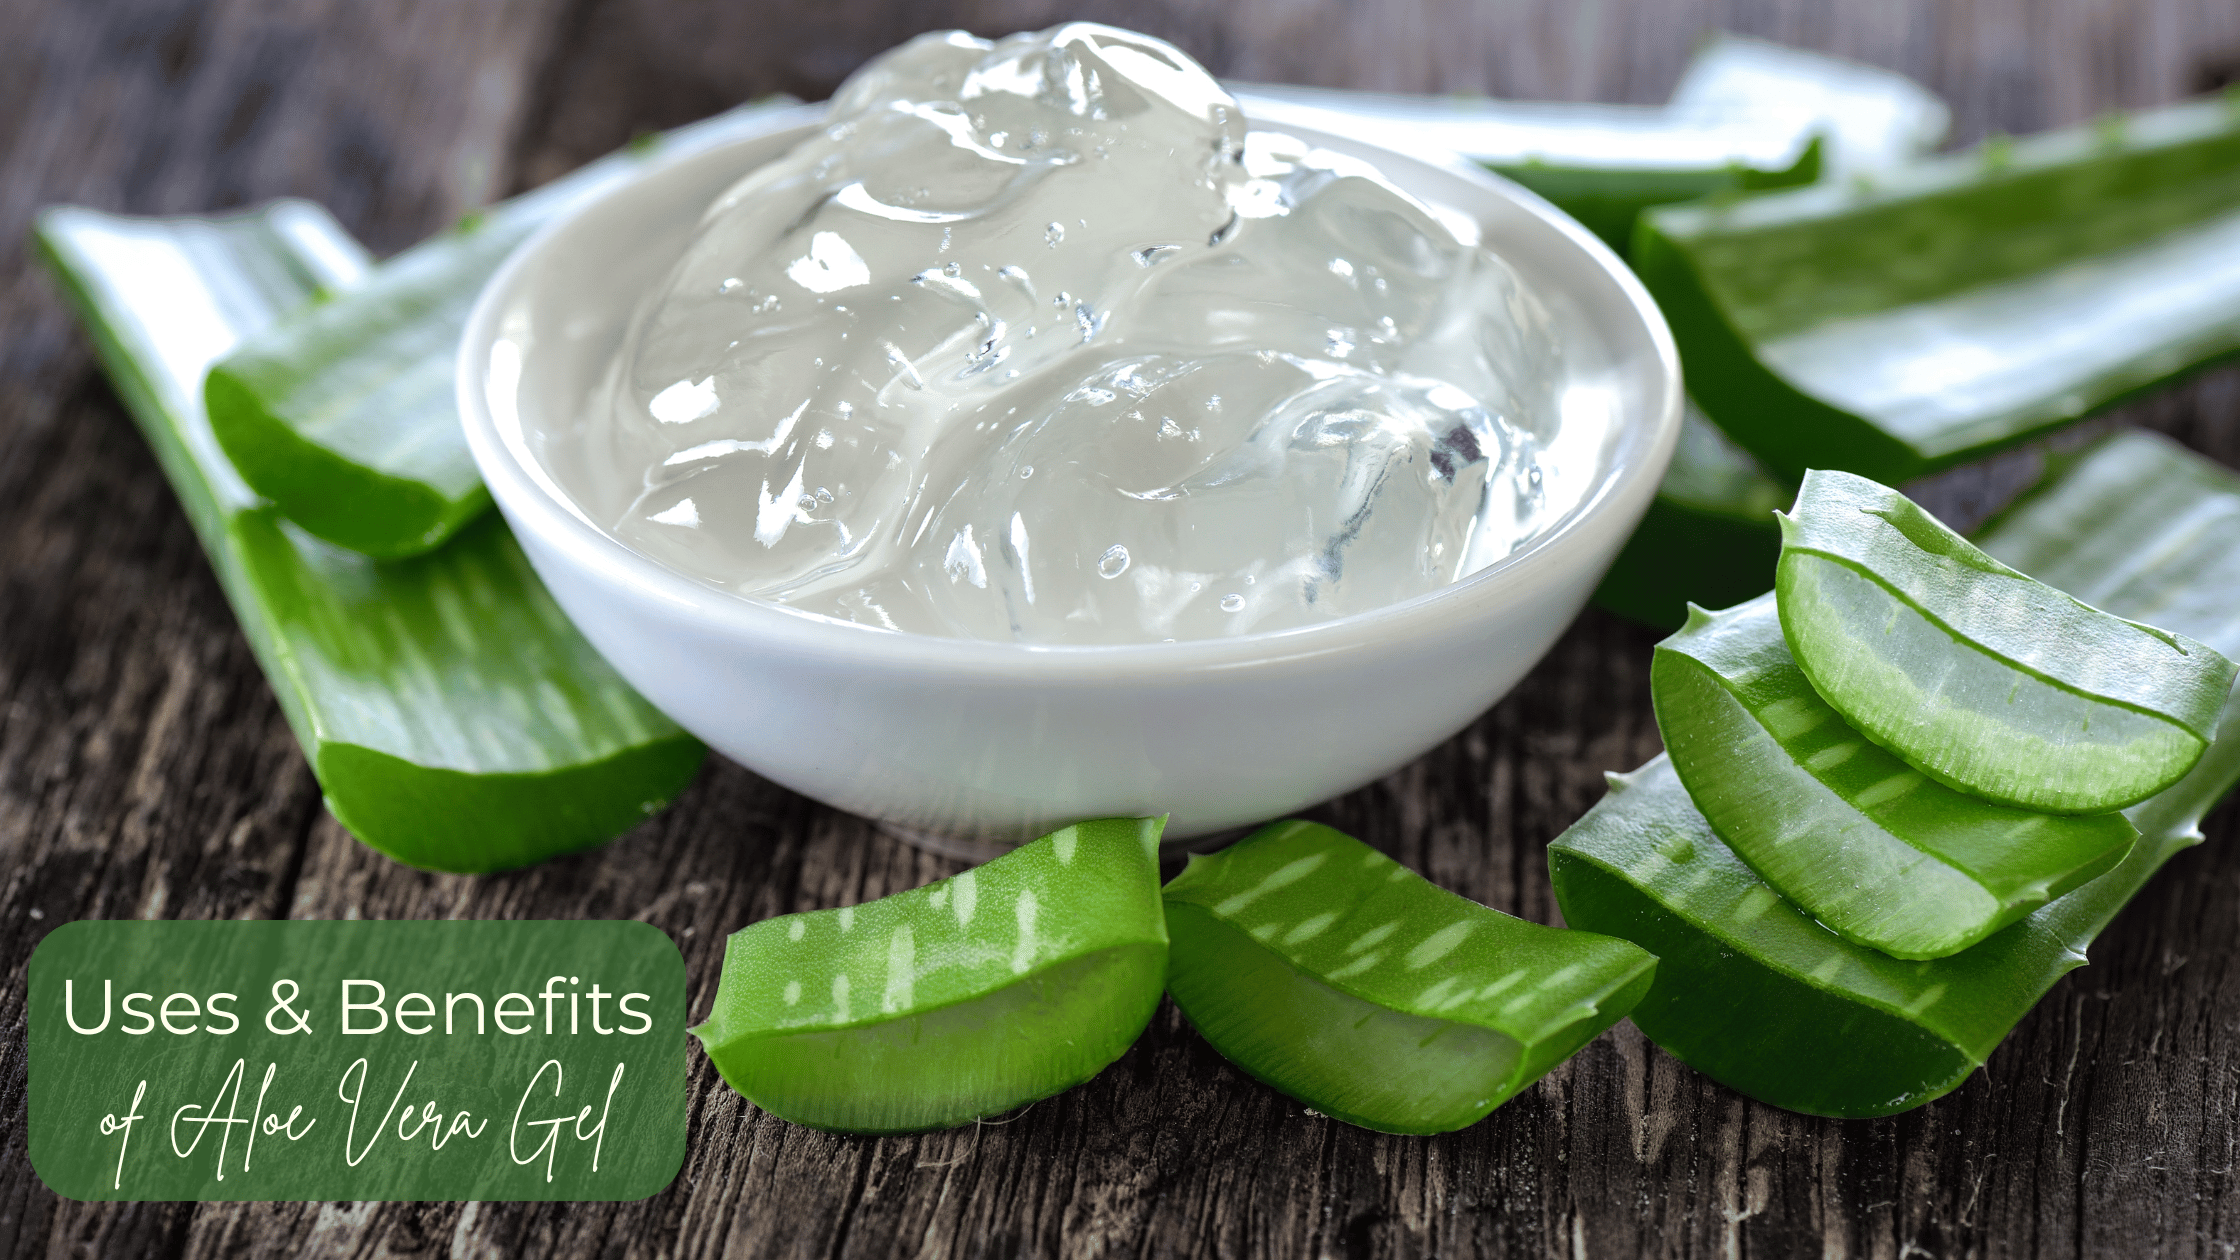 The Miracle Gel: Top Uses and Benefits of Aloe Vera Gel for Your Skin and Hair